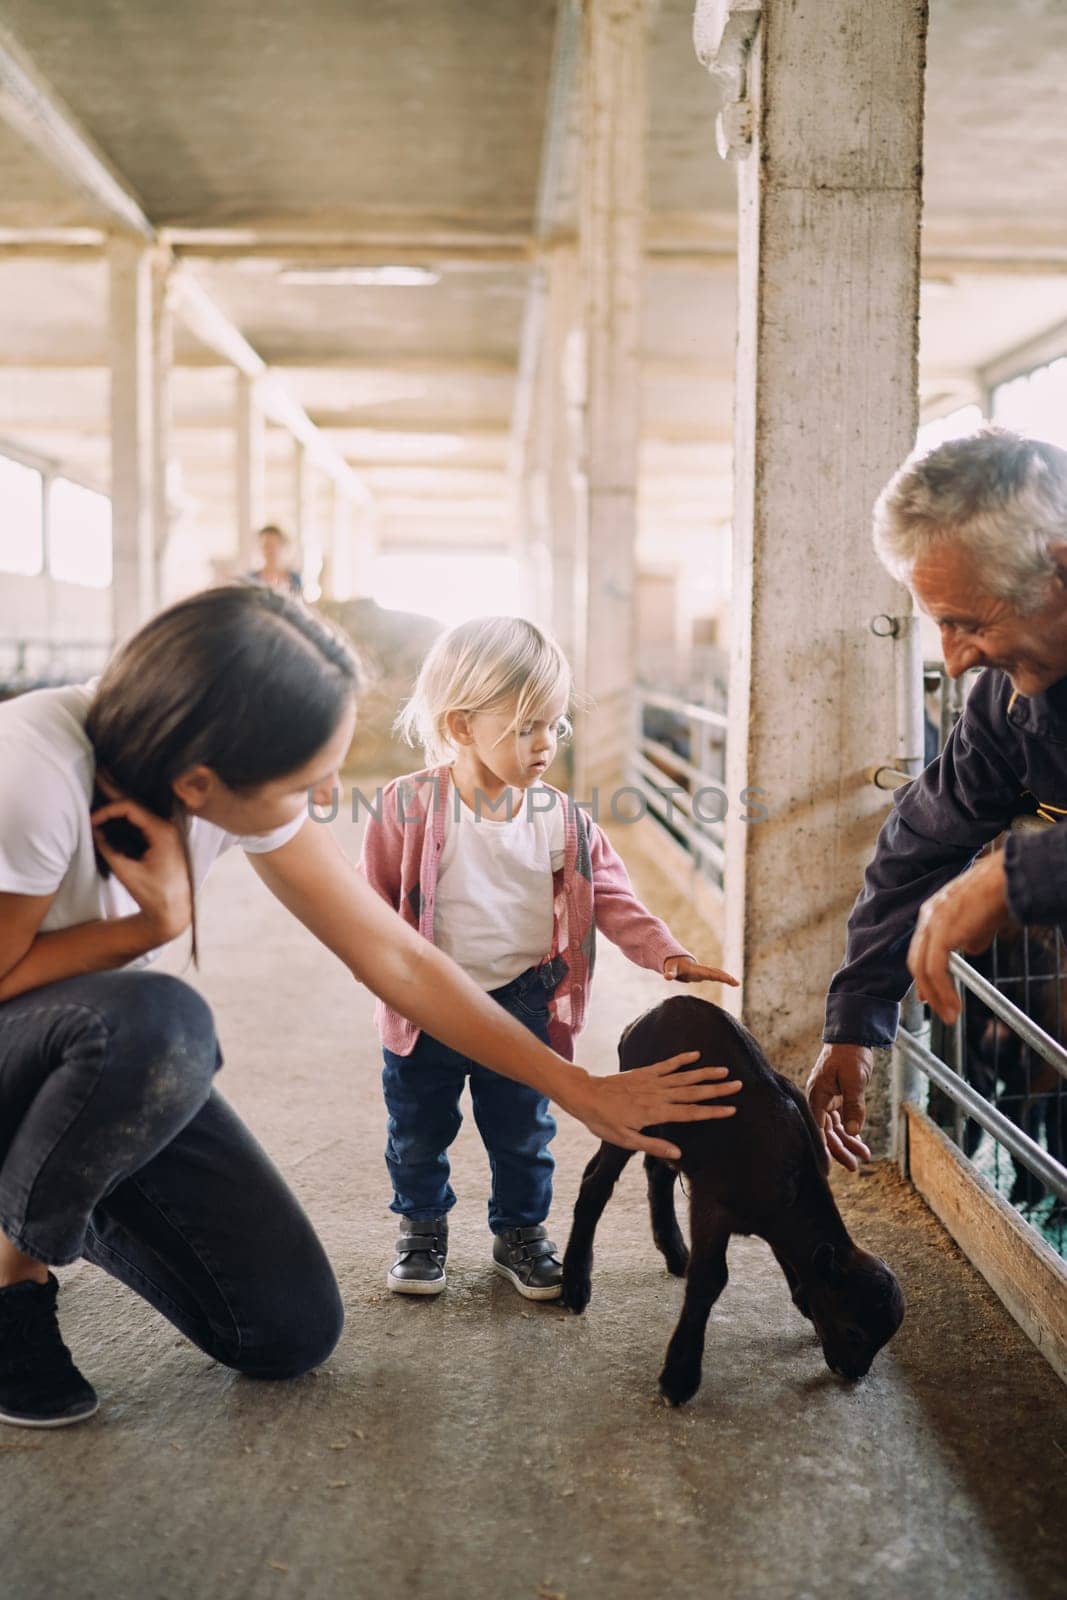 Male farmer, mother and little girl petting a goat near the fence at the ranch. High quality photo